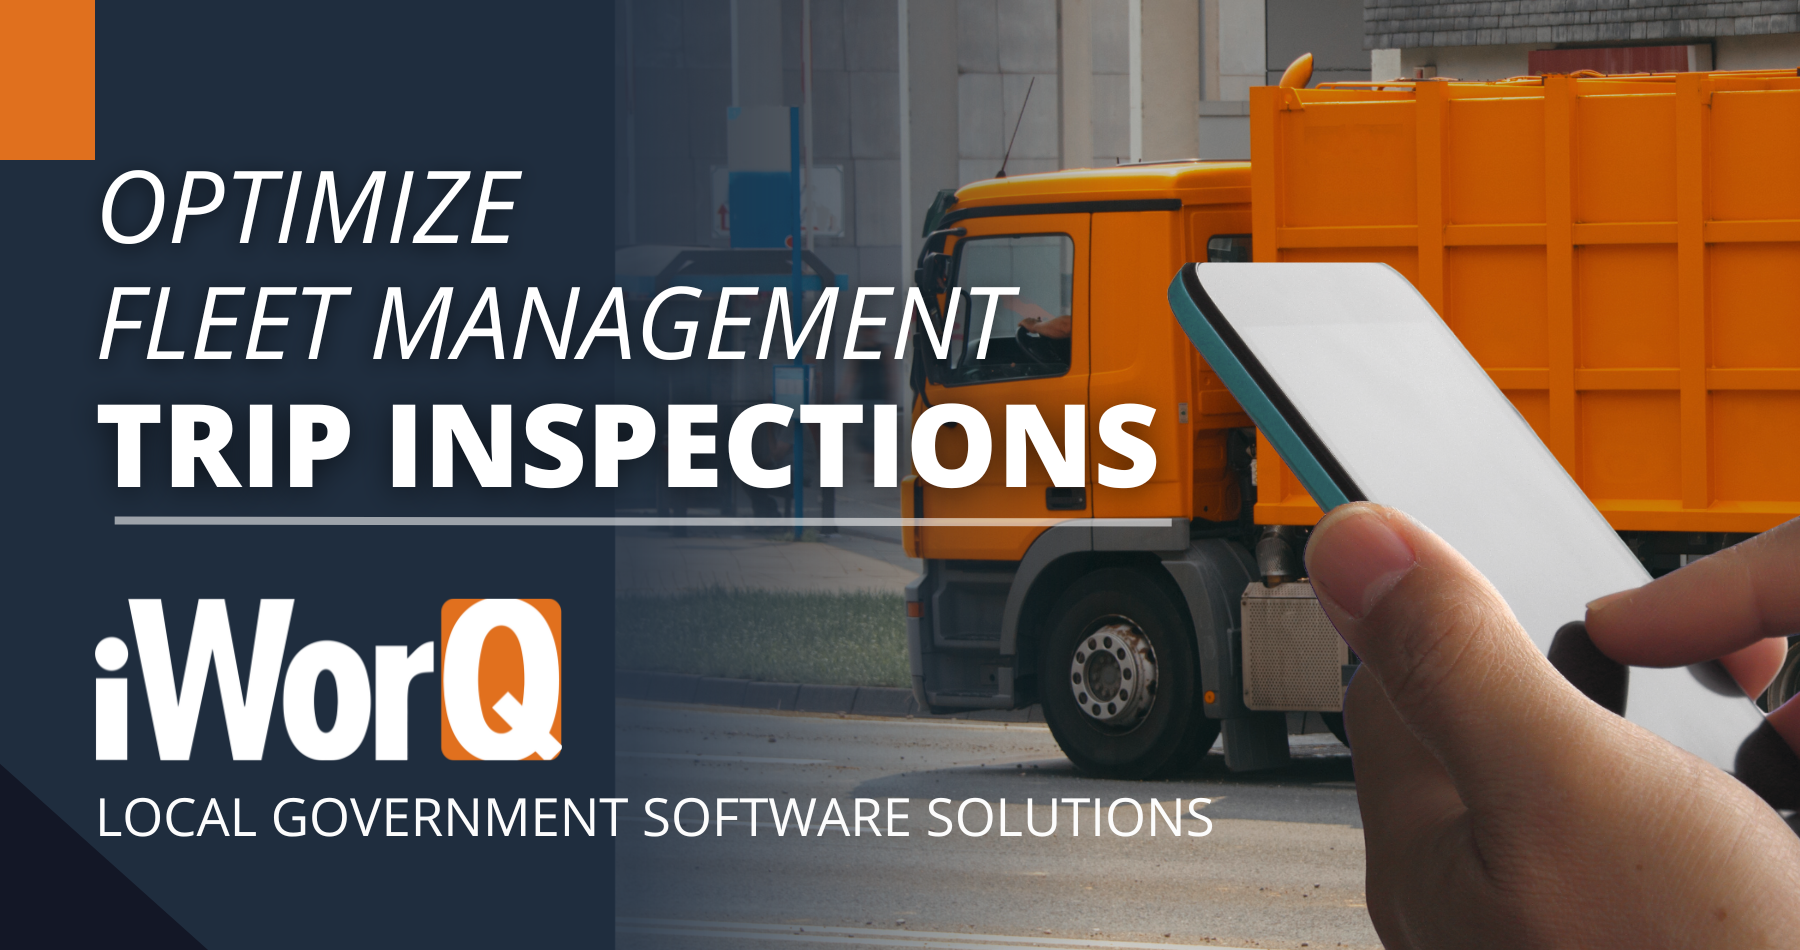 Optimize Fleet Management Trip Inspections with iWorQ local government software solutions